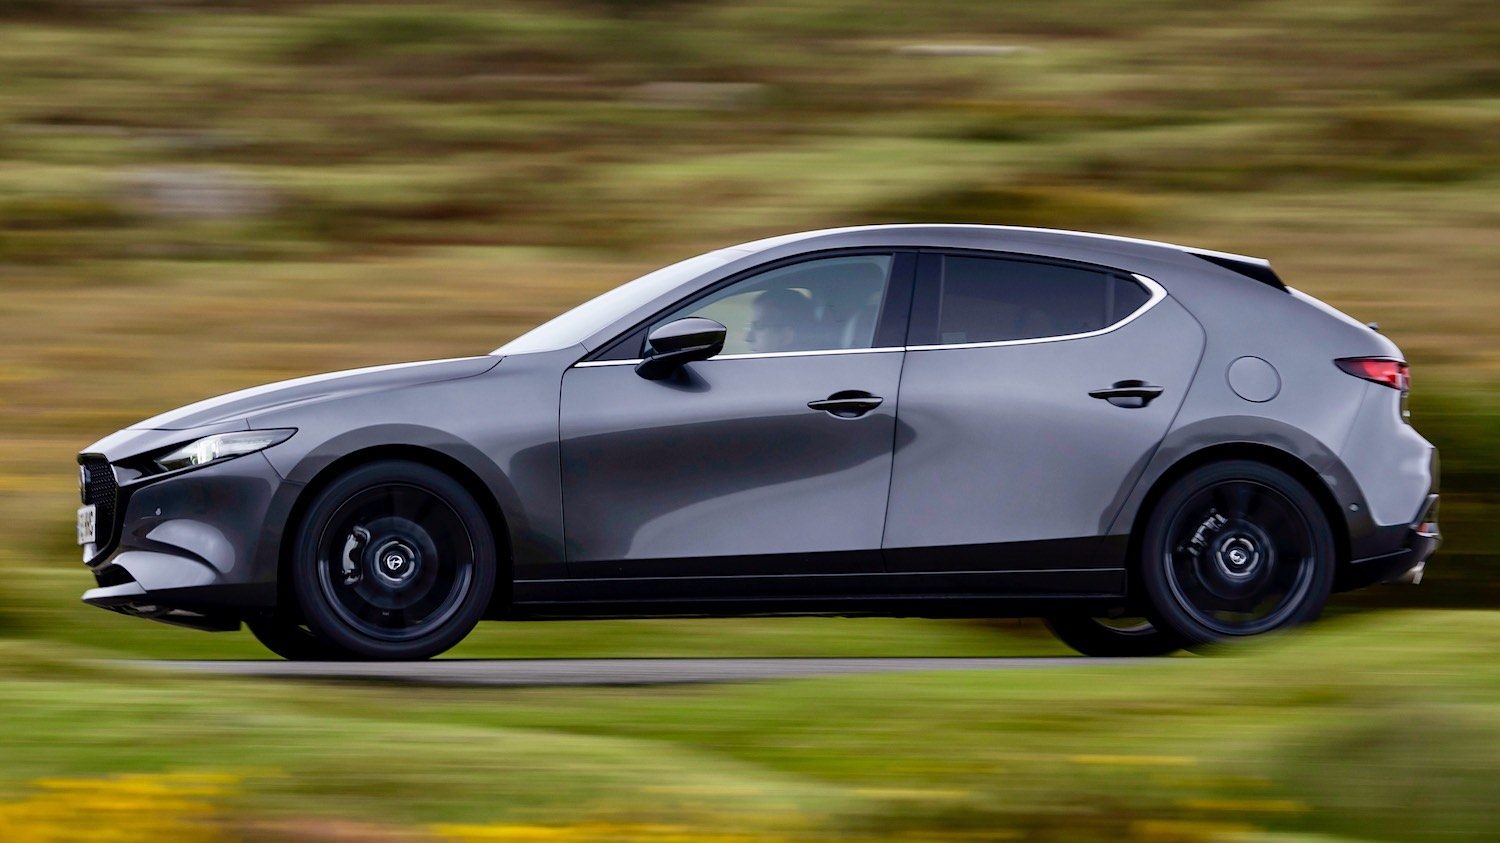 Drive.co.uk Reviewed The Mazda3 SkyActivX Clever and